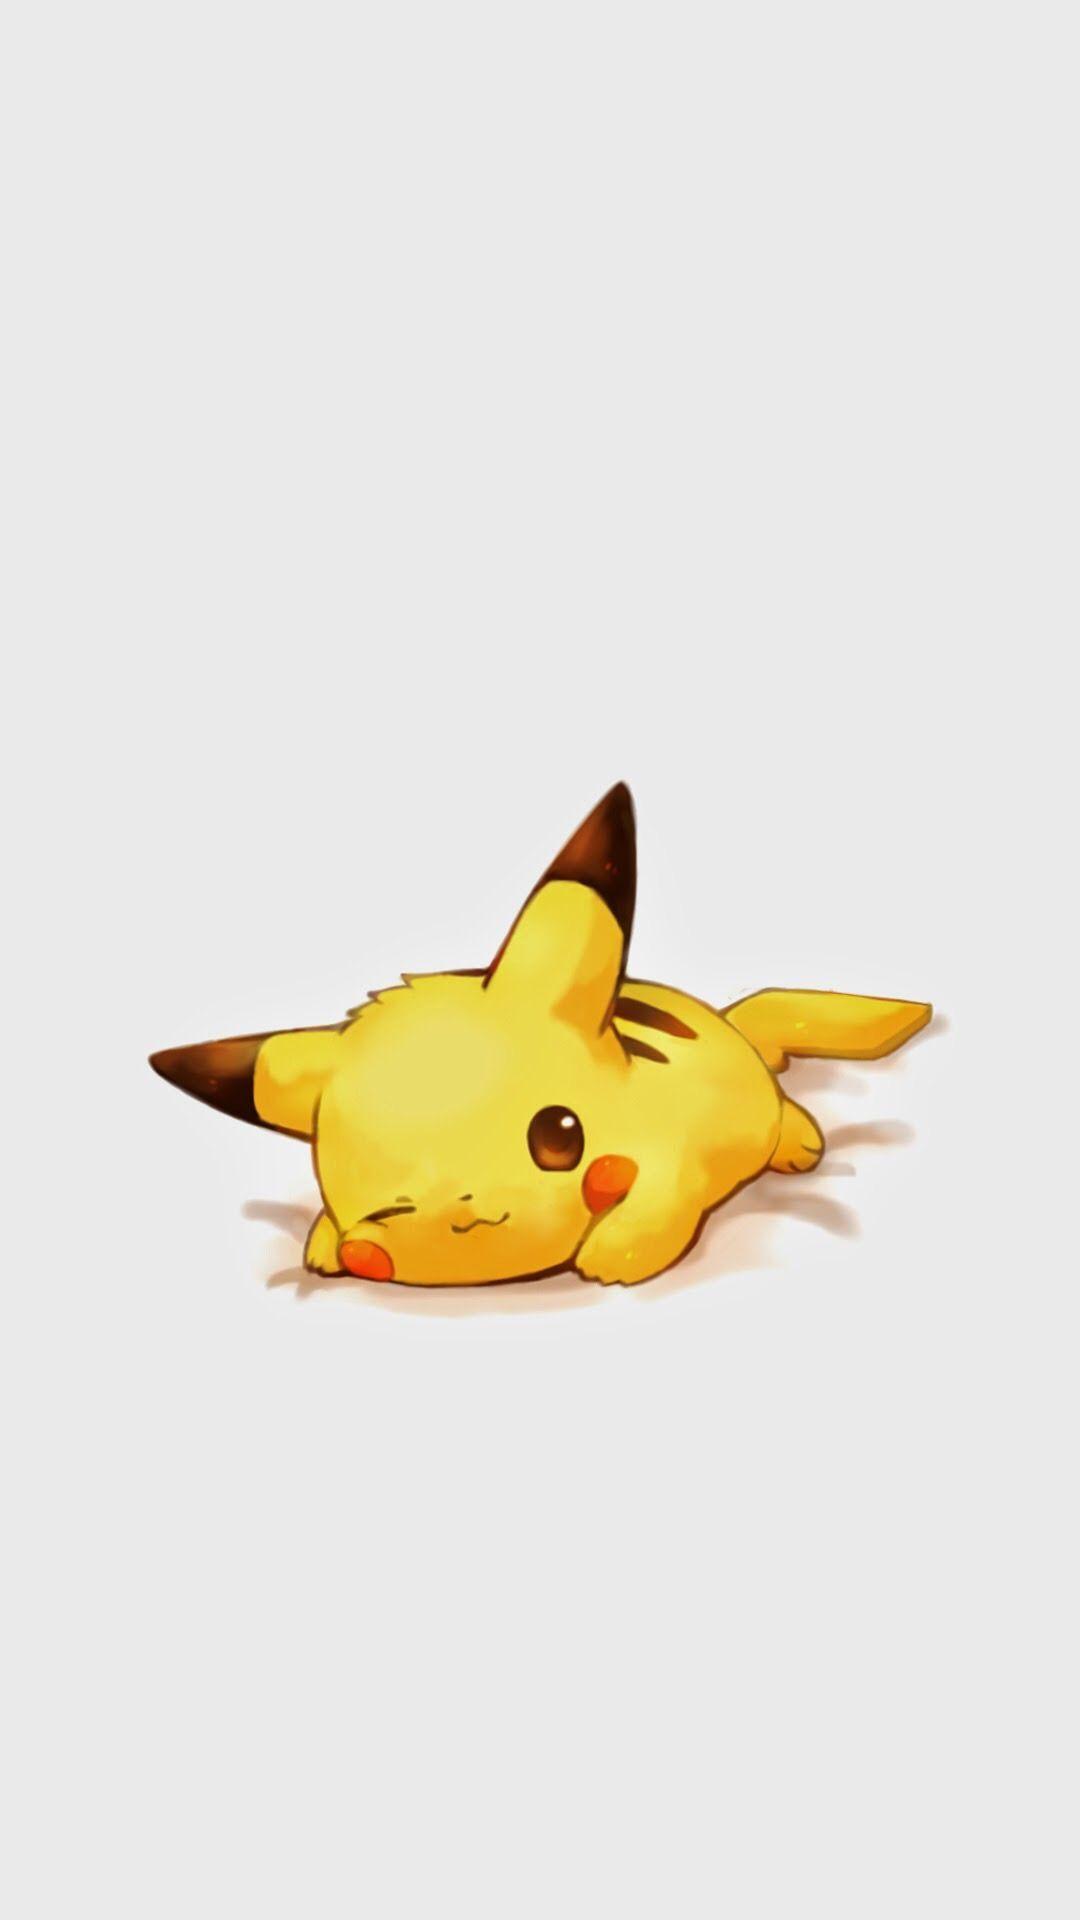 Great 9 Pikachu Wallpaper For Your Android or iPhone Wallpaper #android #iphone #wallpaper. Pikachu wallpaper, Cute pokemon, Cute pikachu